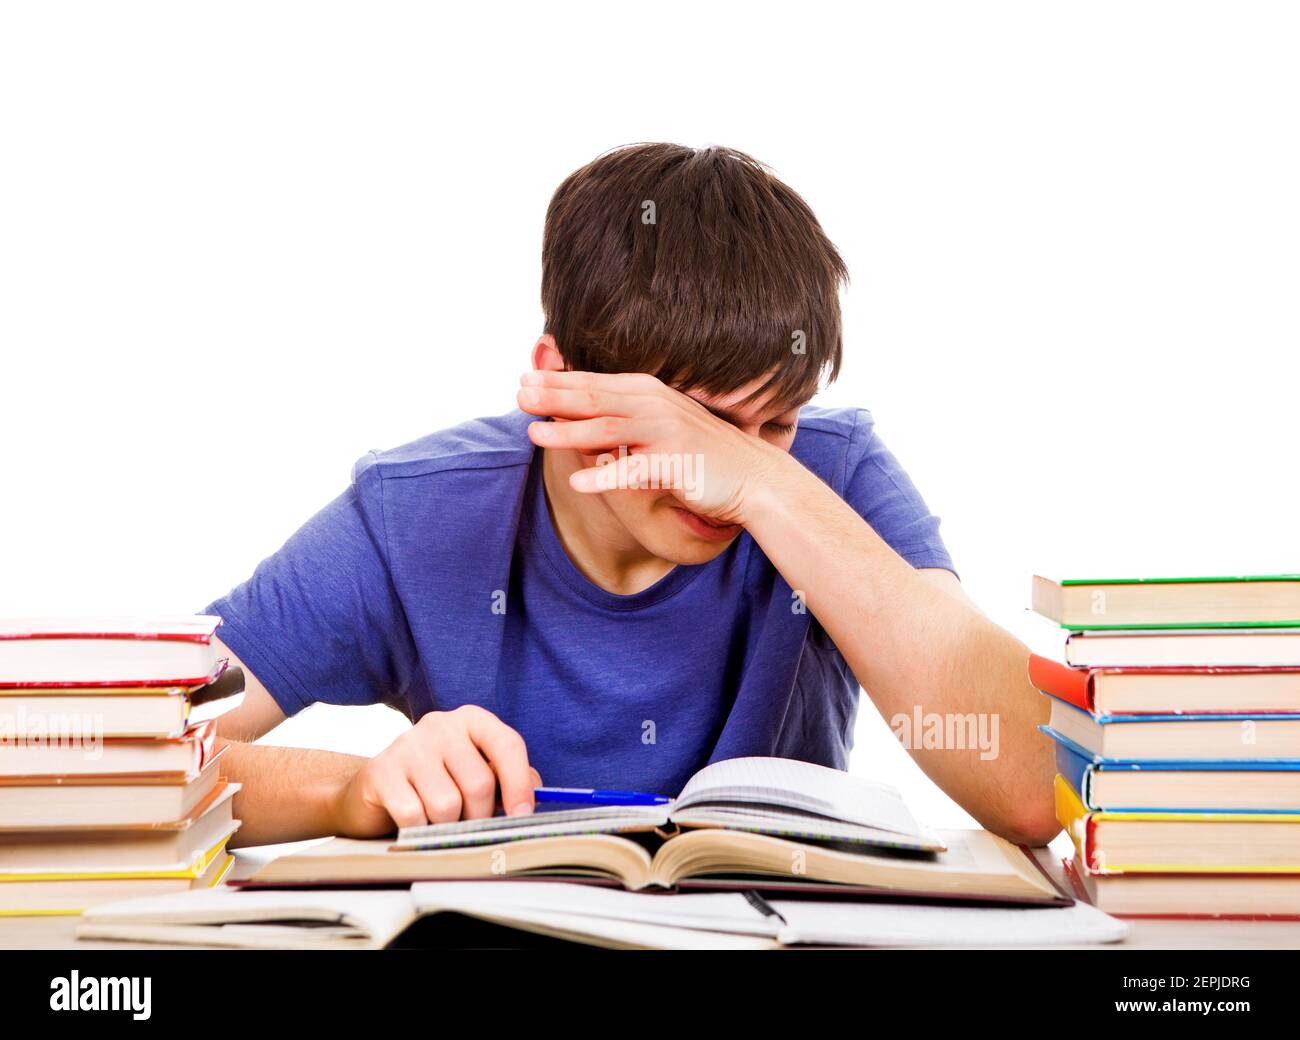 Tired Student Rub an Eyes on the School Desk Isolated on the White Background Stock Photo